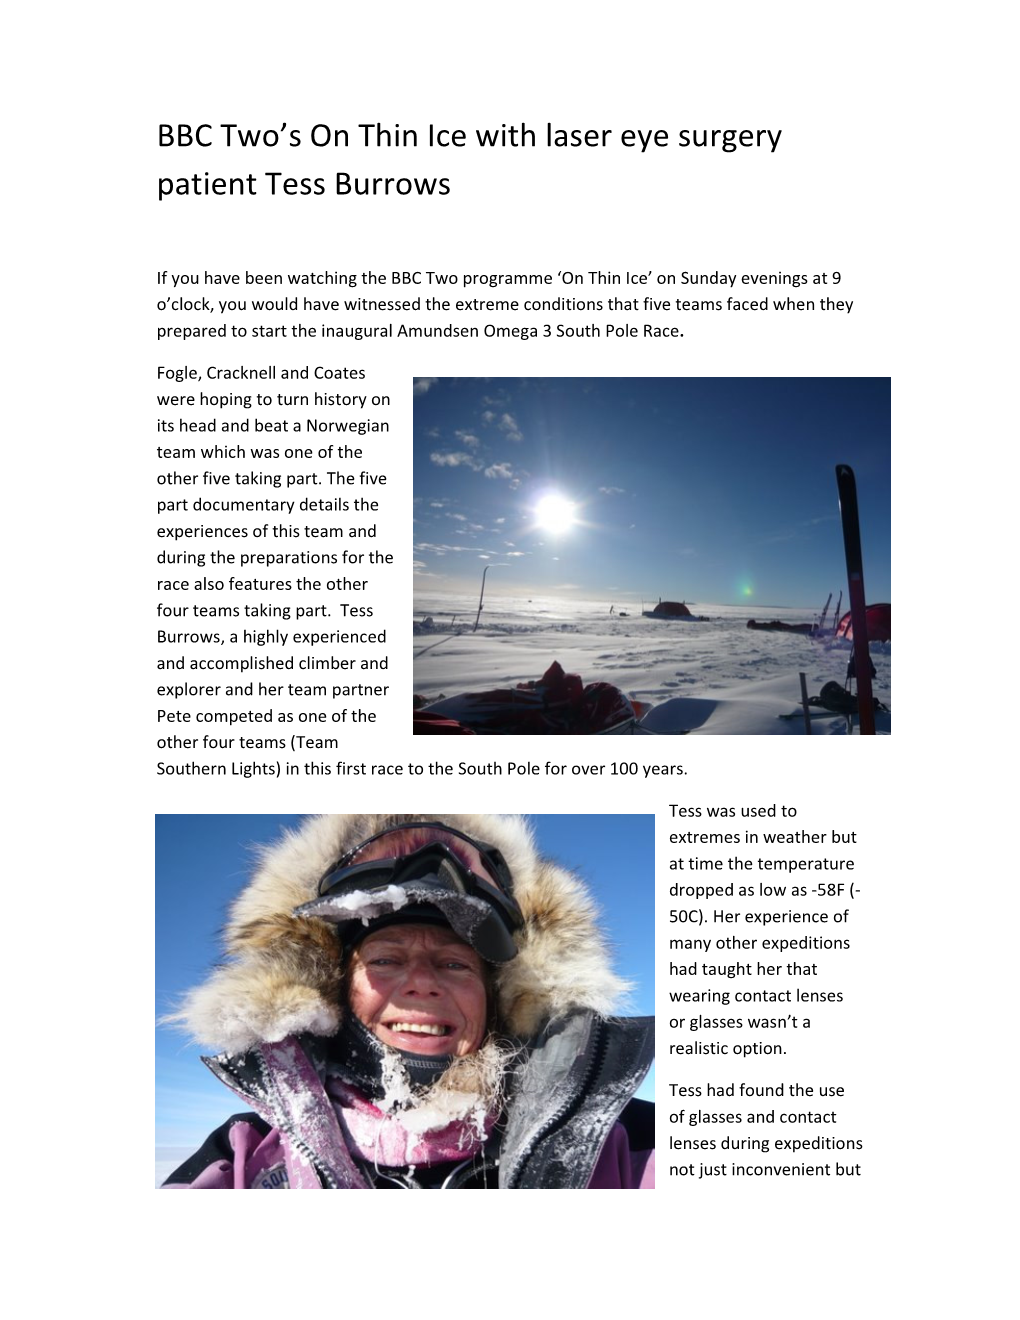 BBC Two's on Thin Ice with Laser Eye Surgery Patient Tess Burrows